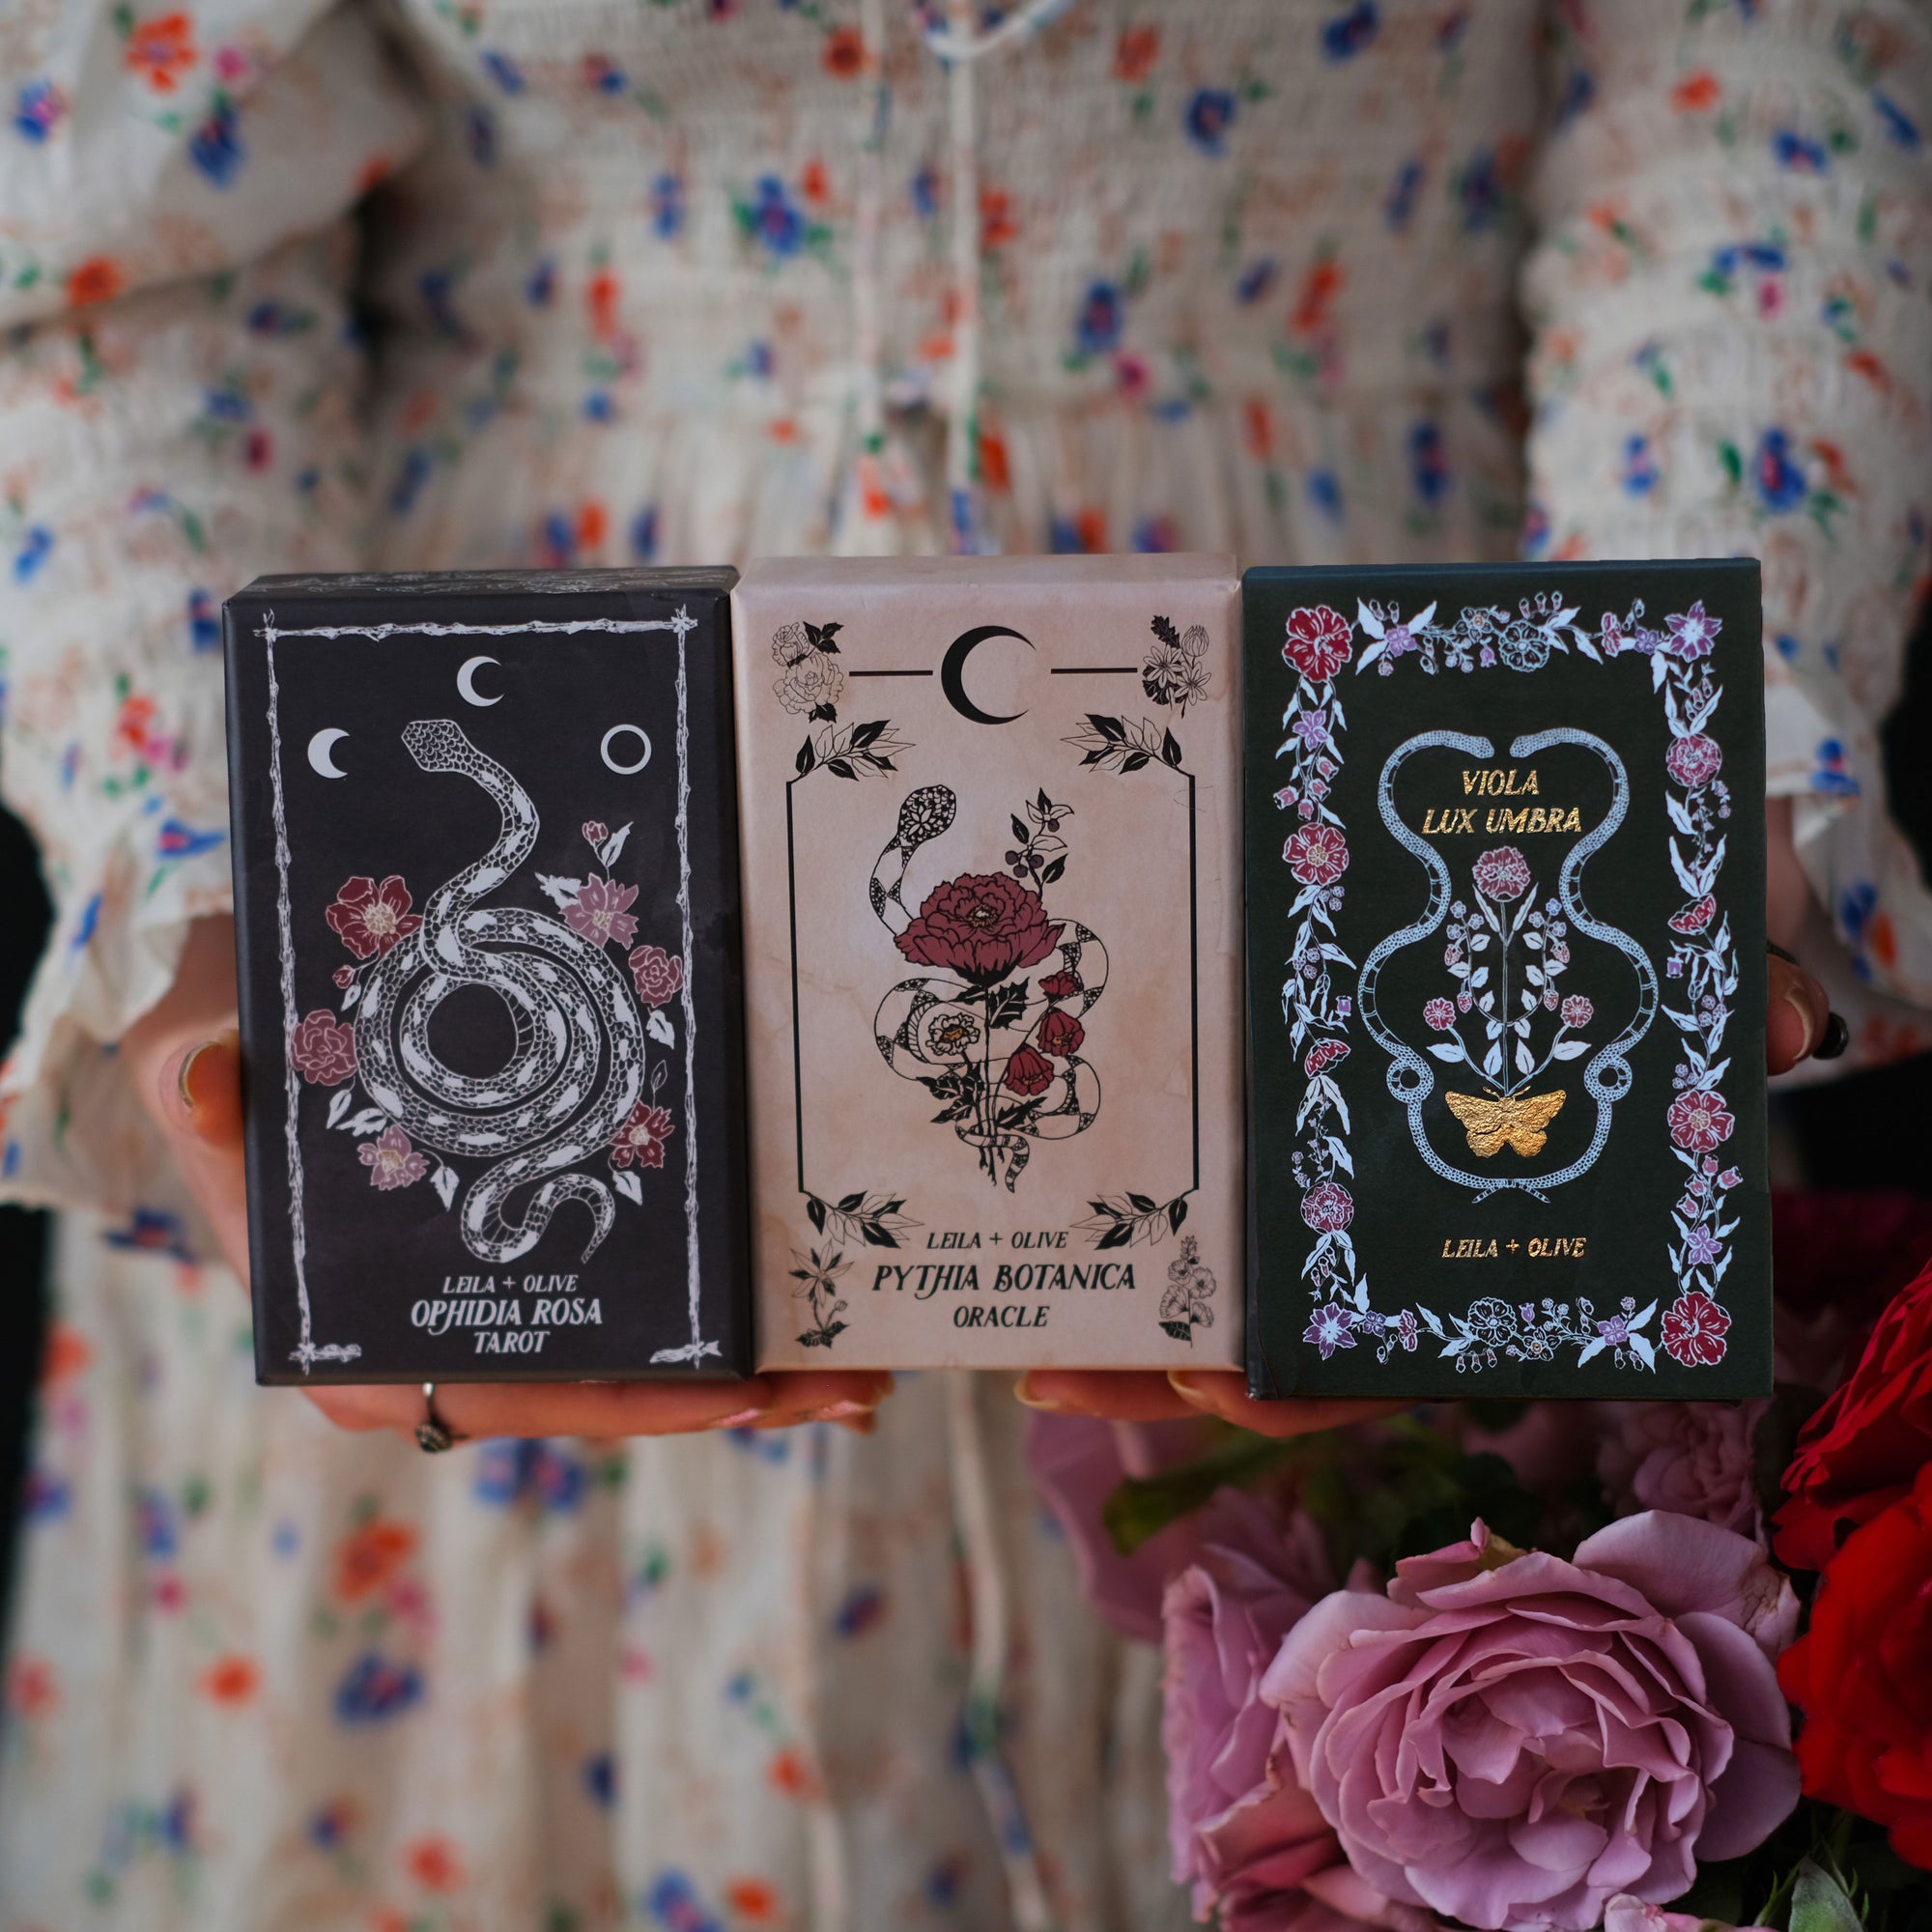 Botanical Tarot deck, Viola Lux Umbra, is illustrated by hand and rooted in the plant kingdom.